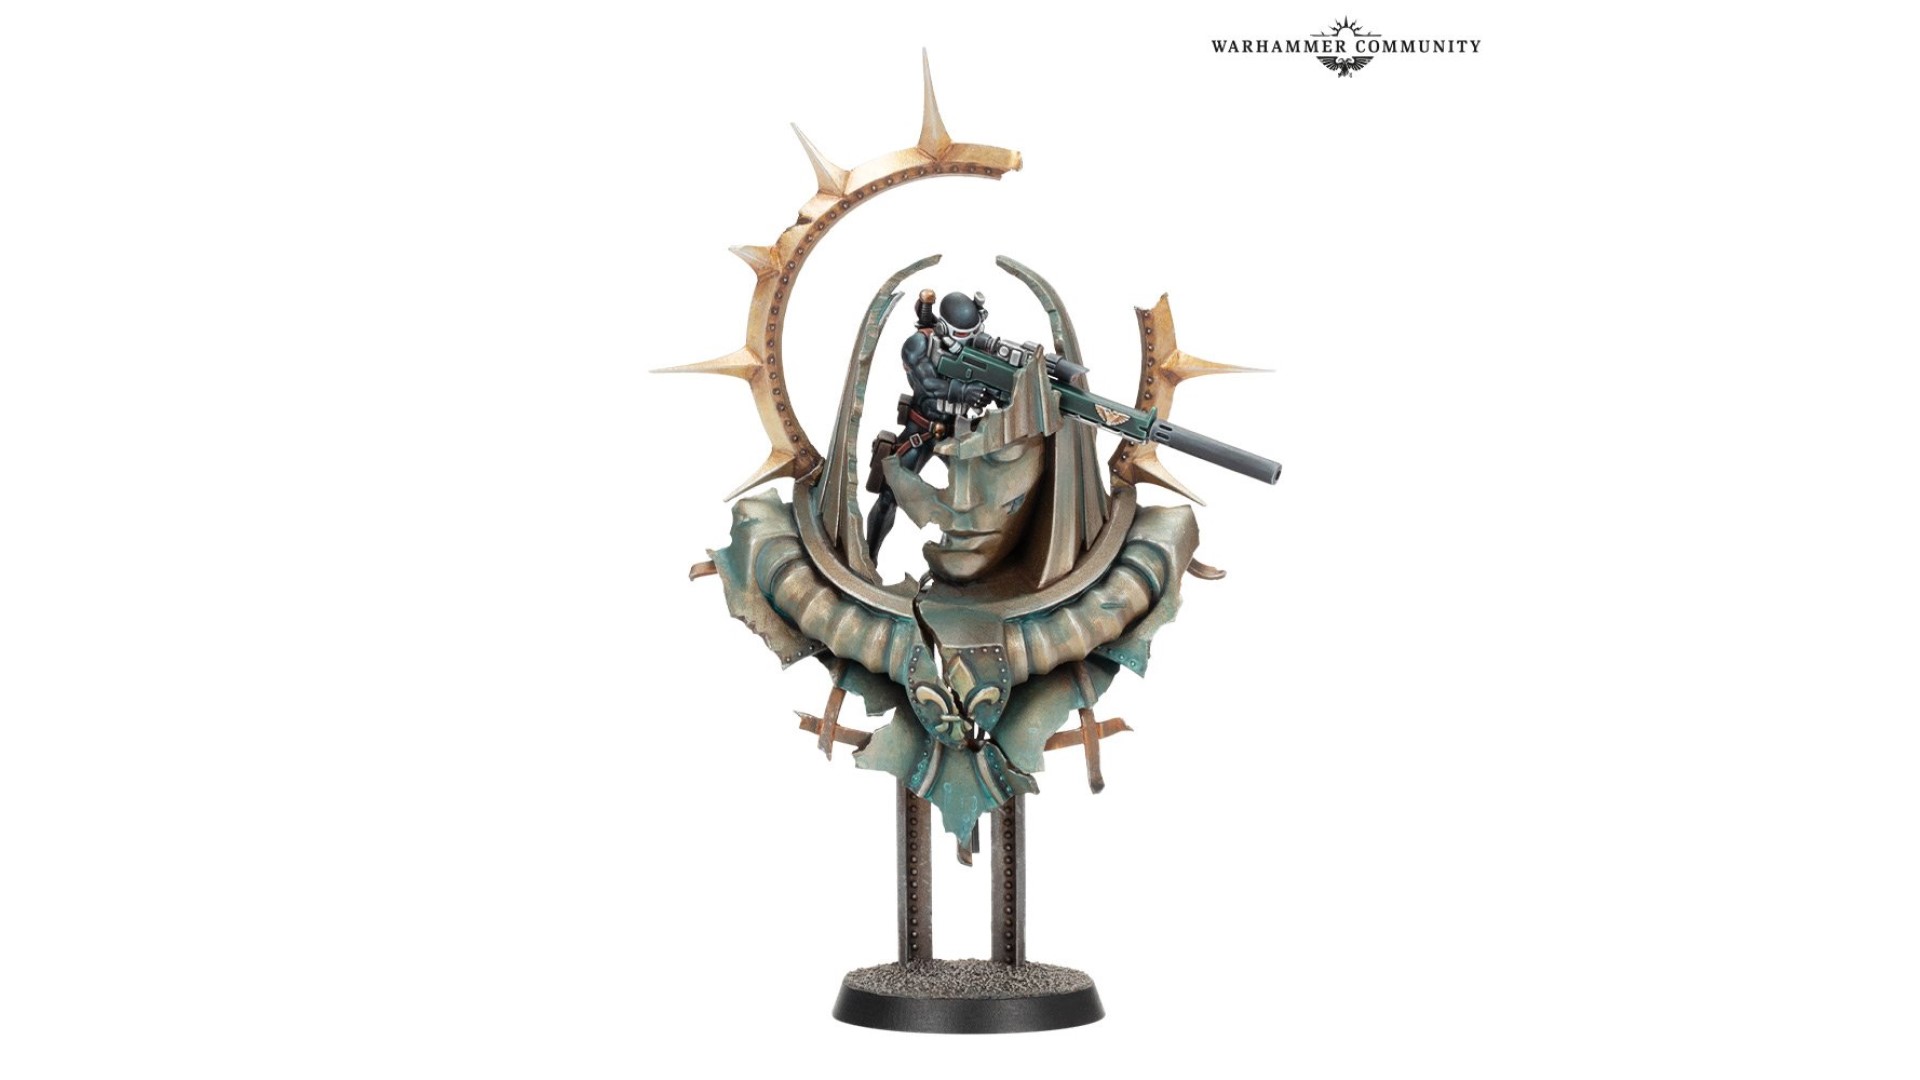 Warhammer+ release date, prices, TV shows, minis, and more revealed